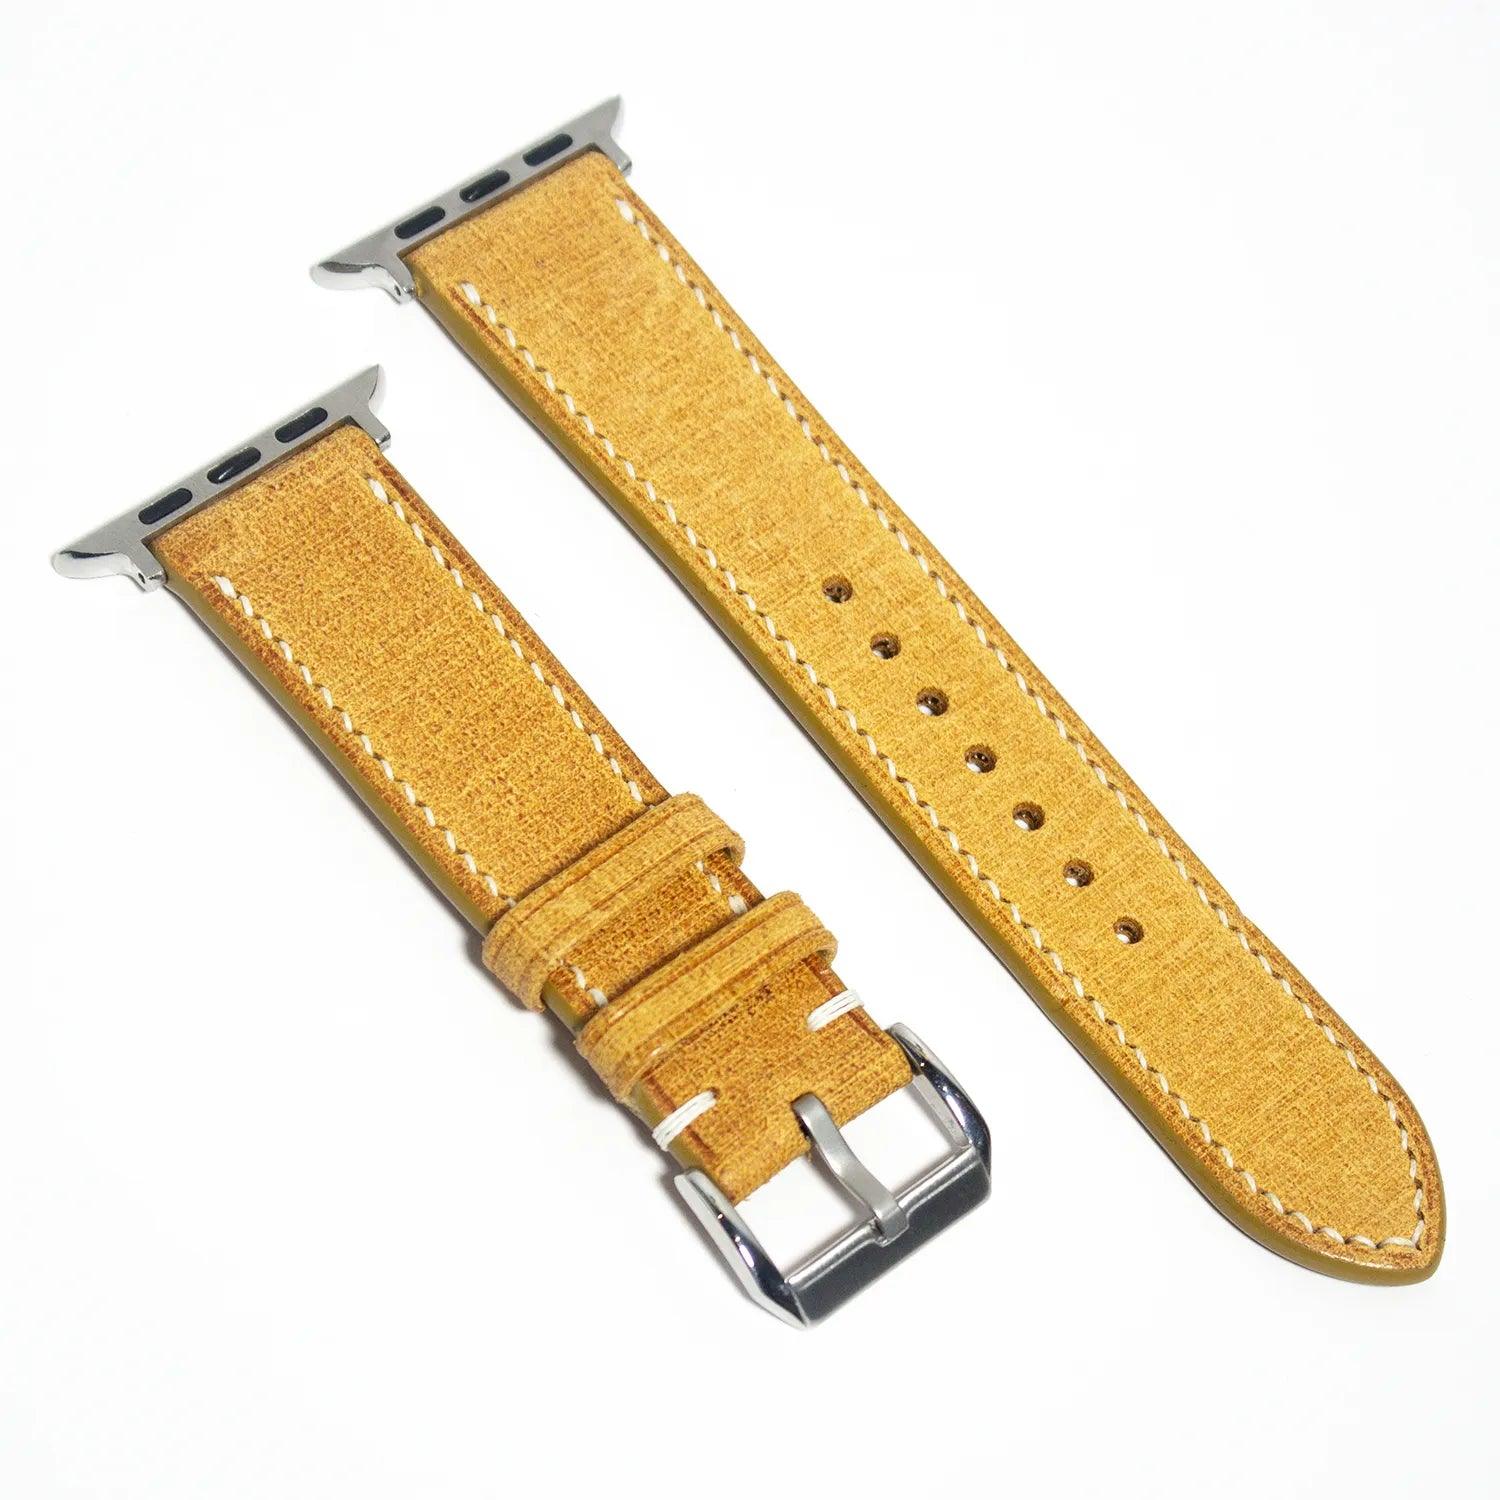 Chic leather Apple Watch band in yellow Babele leather, designed for those who appreciate bold elegance.